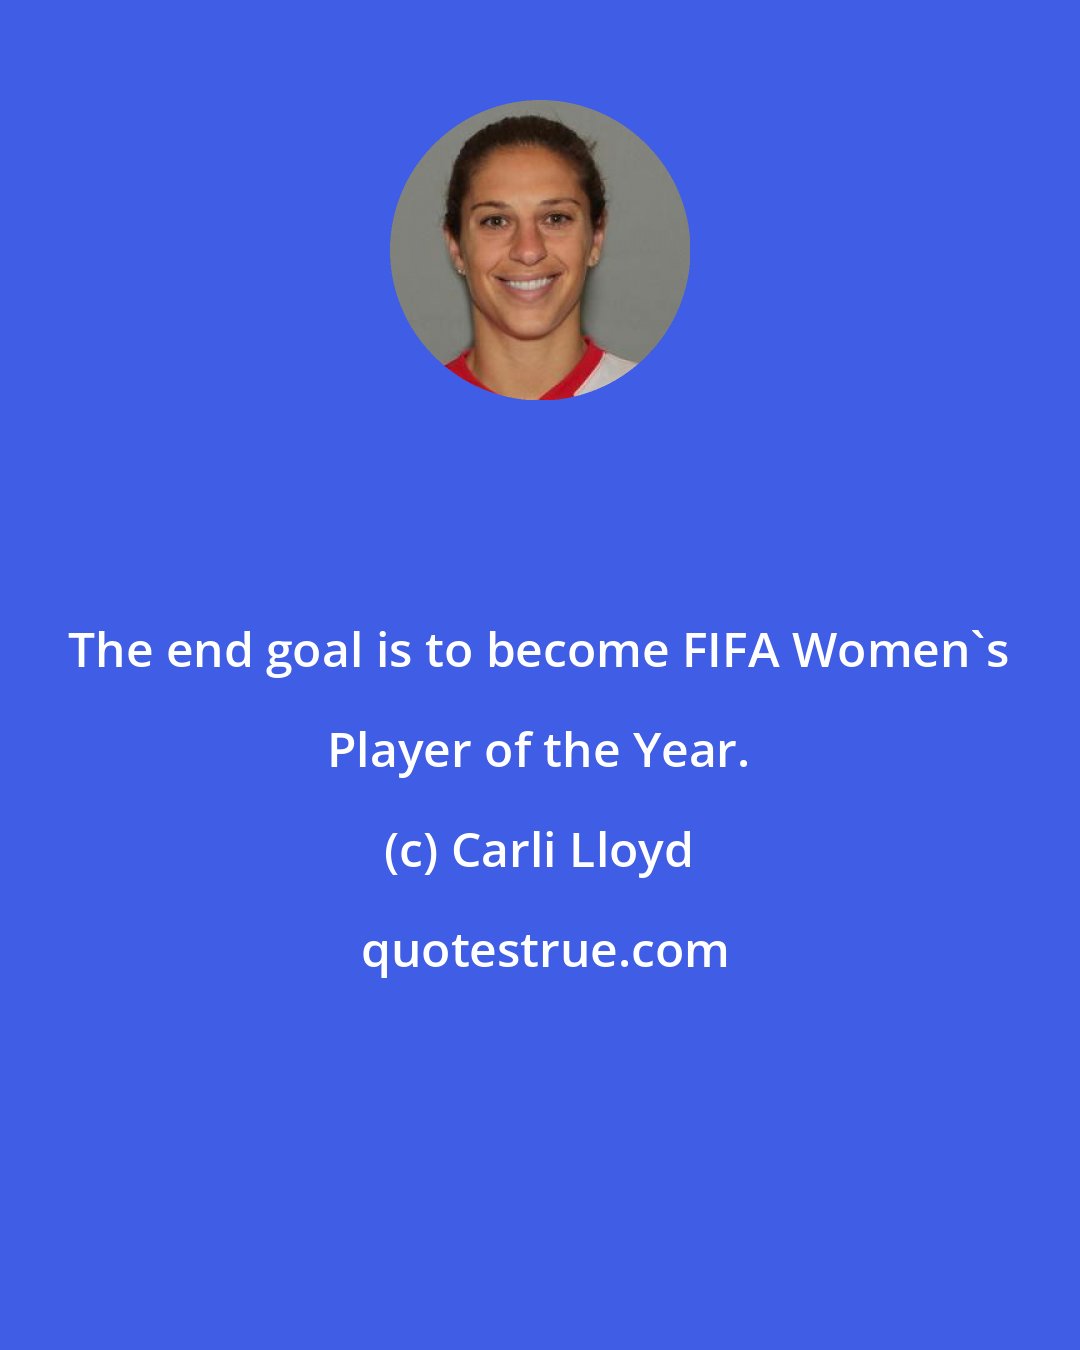 Carli Lloyd: The end goal is to become FIFA Women's Player of the Year.